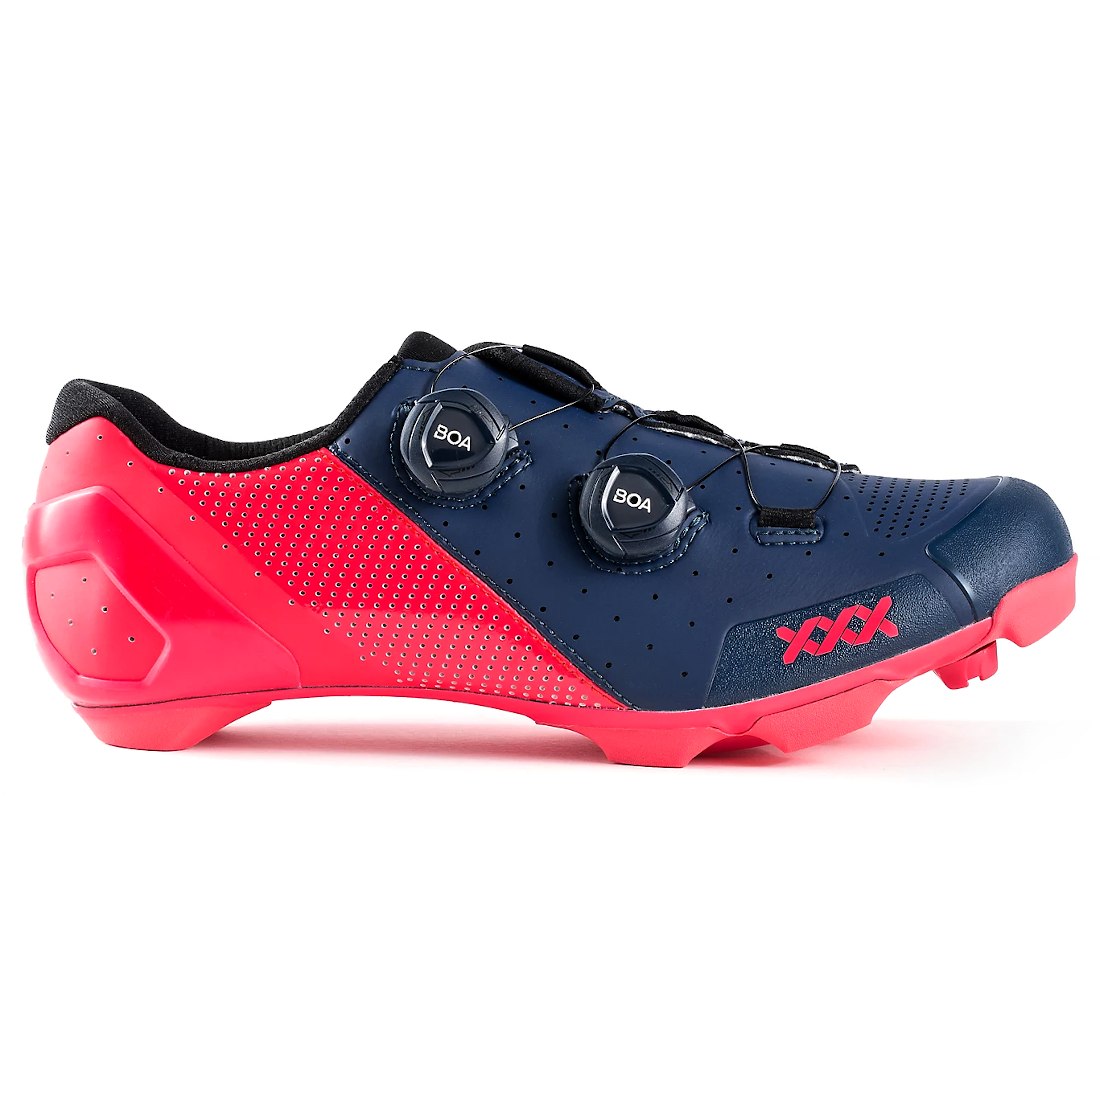 Picture of Bontrager XXX Mountain Shoe - nautical navy/radioactive pink